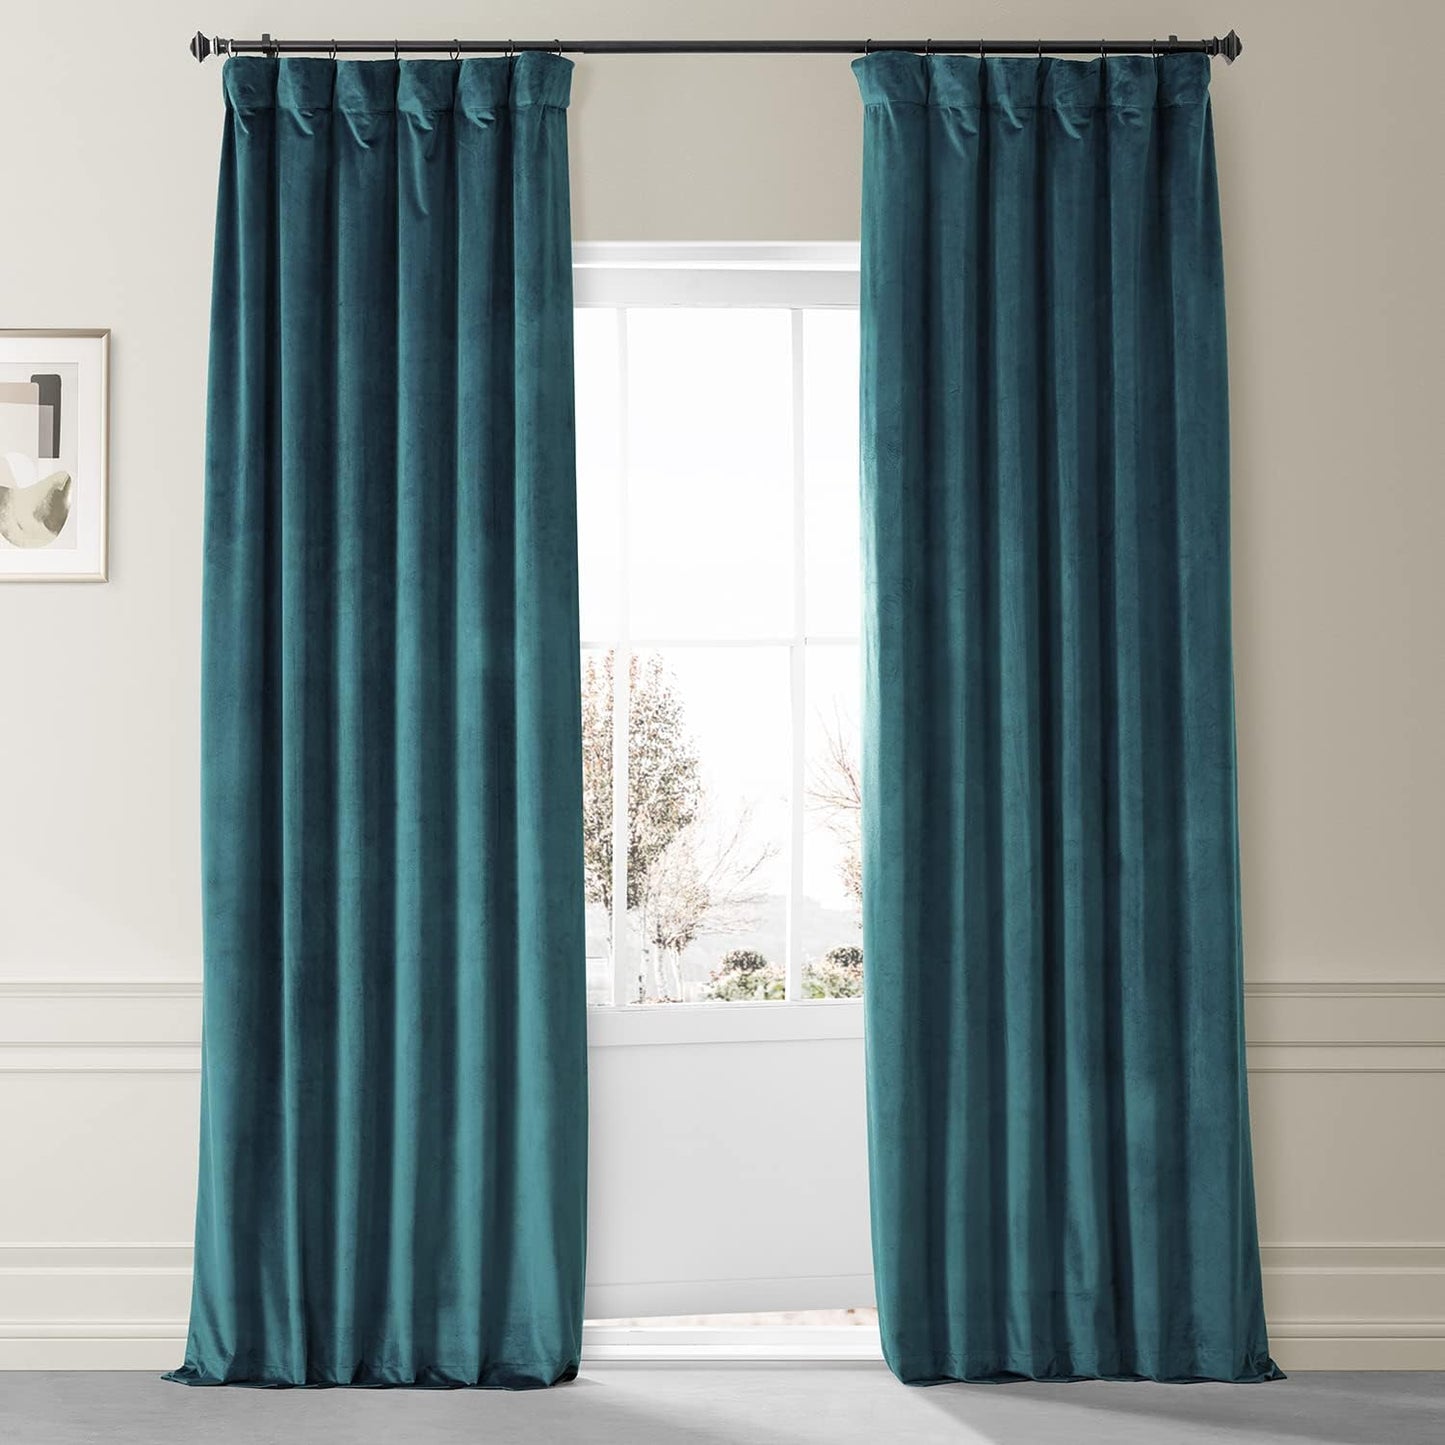 HPD HALF PRICE DRAPES Blackout Solid Thermal Insulated Window Curtain 50 X 96 Signature Plush Velvet Curtains for Bedroom & Living Room (1 Panel), VPYC-SBO198593-96, Diva Cream  Exclusive Fabrics & Furnishings Sea Garden Teal 50 X 108 